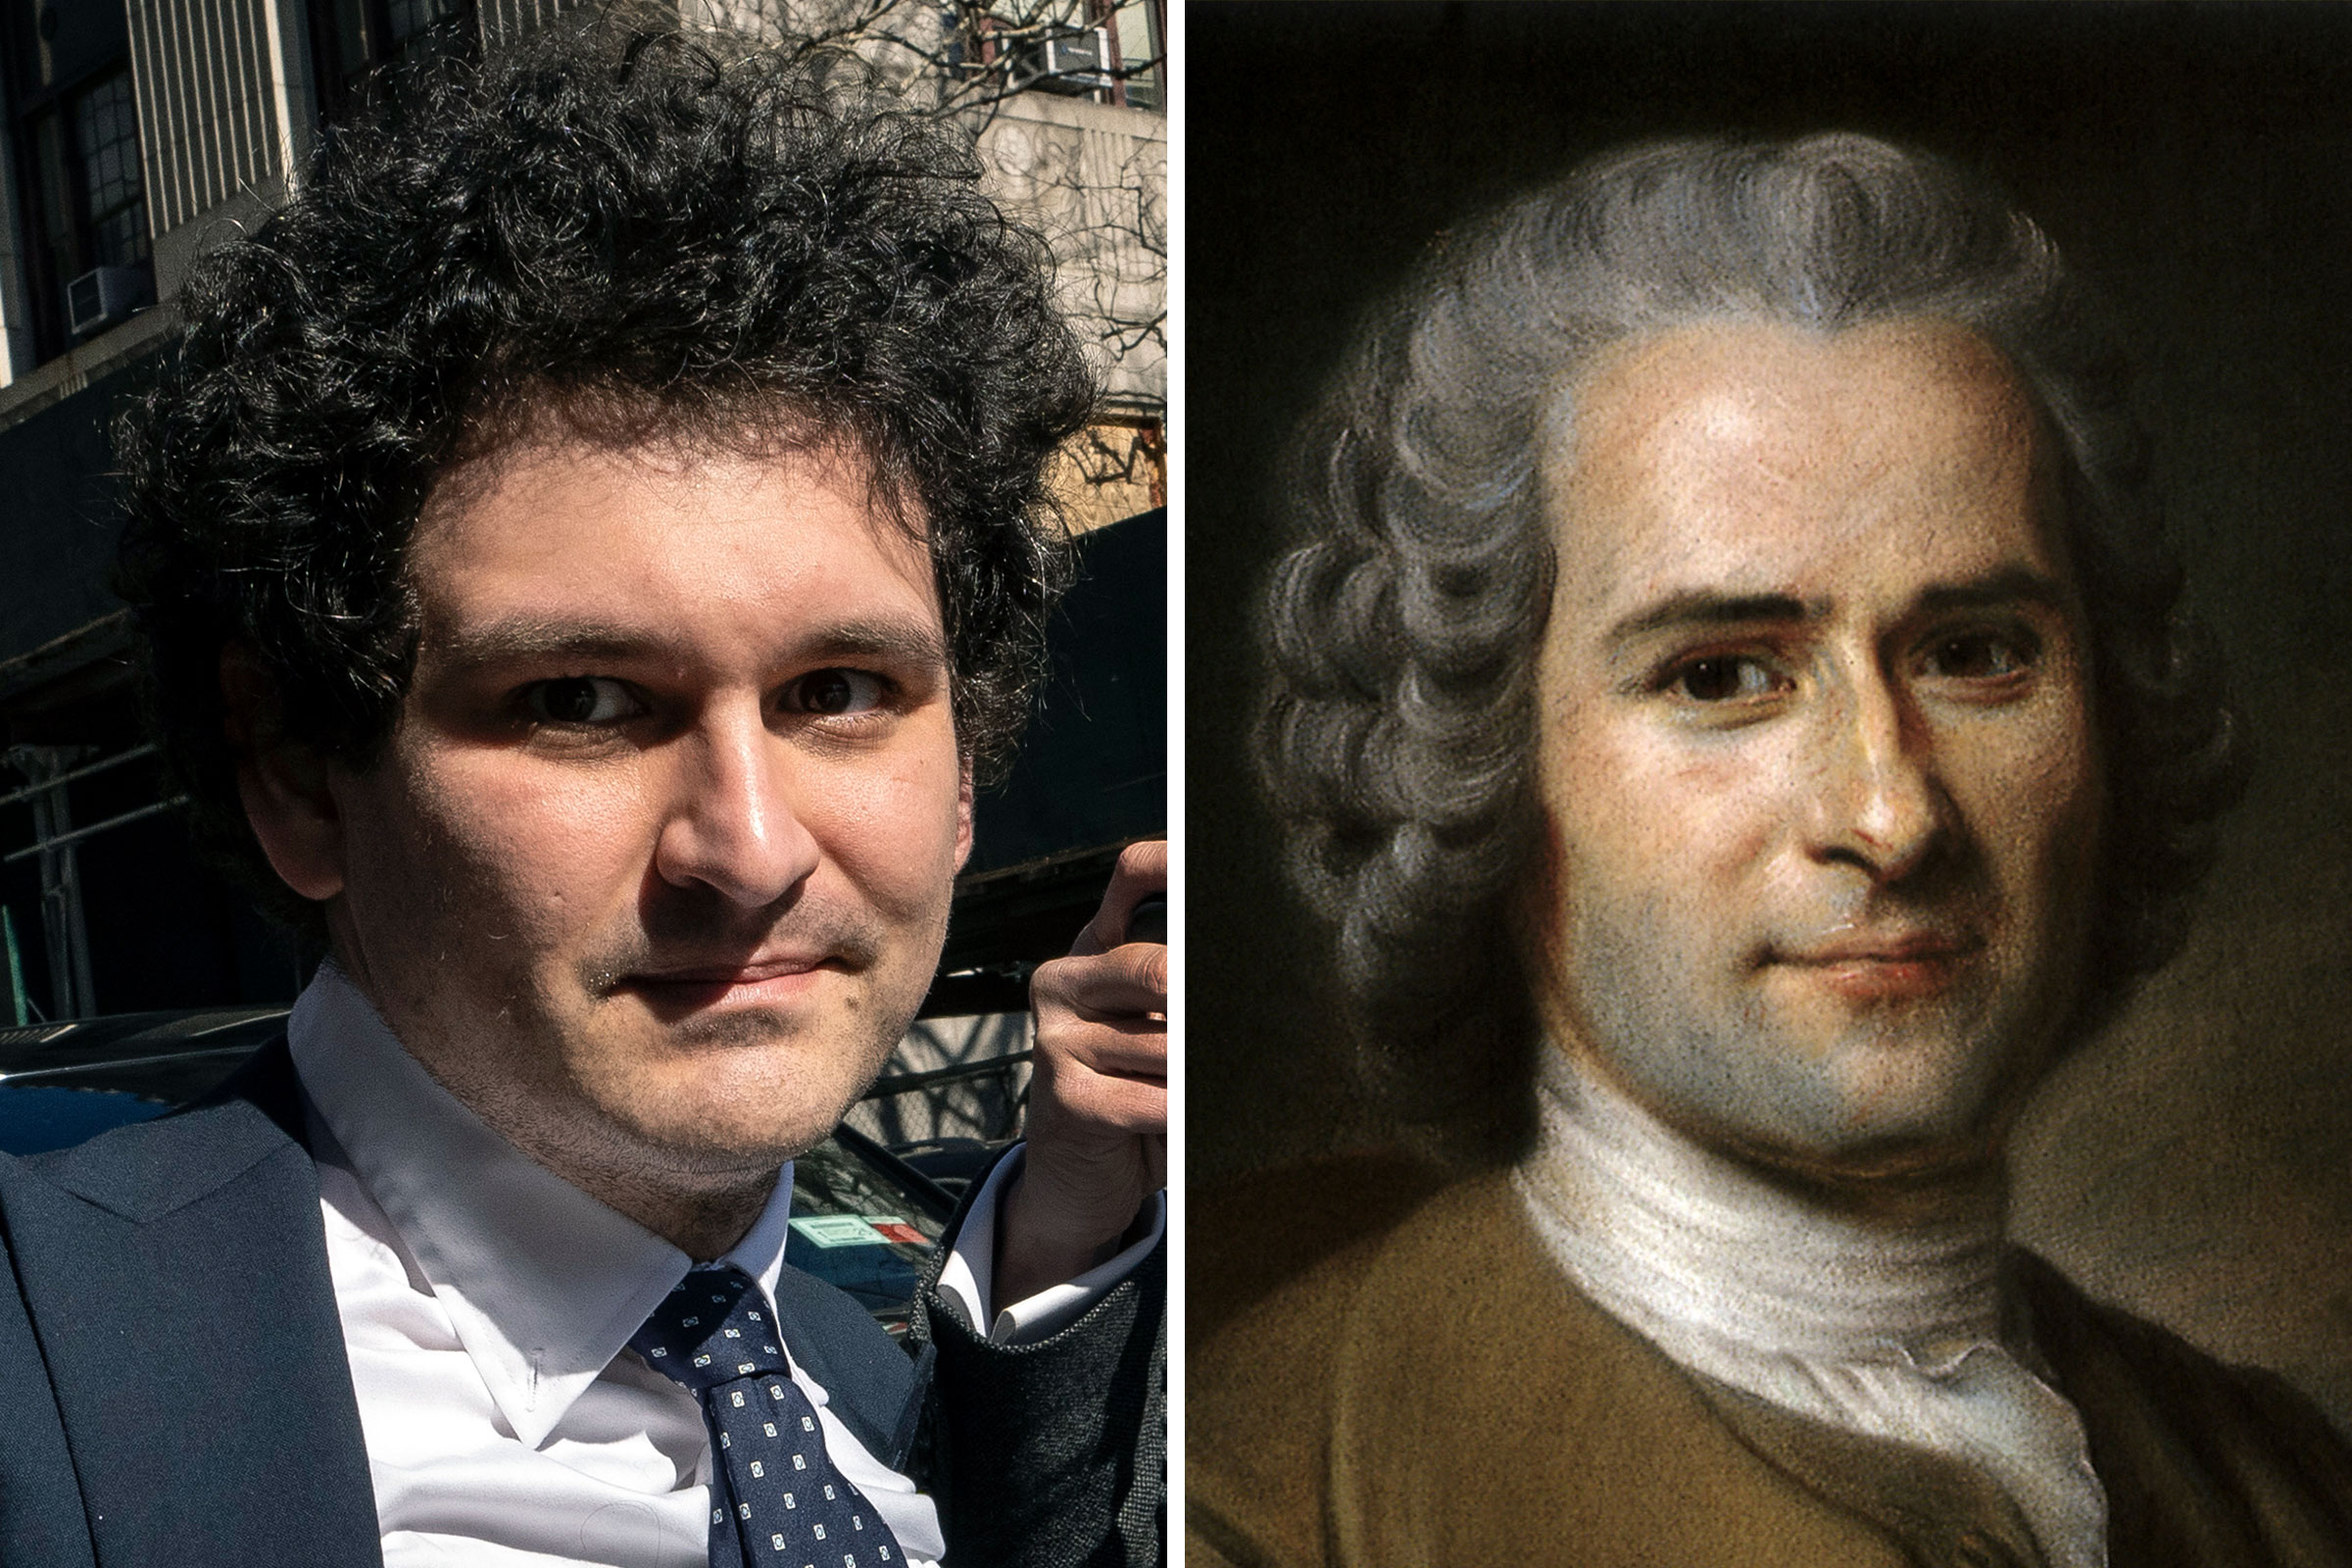 A side by side image of Sam Bankman-Fried and Jean-Jacques Rousseau